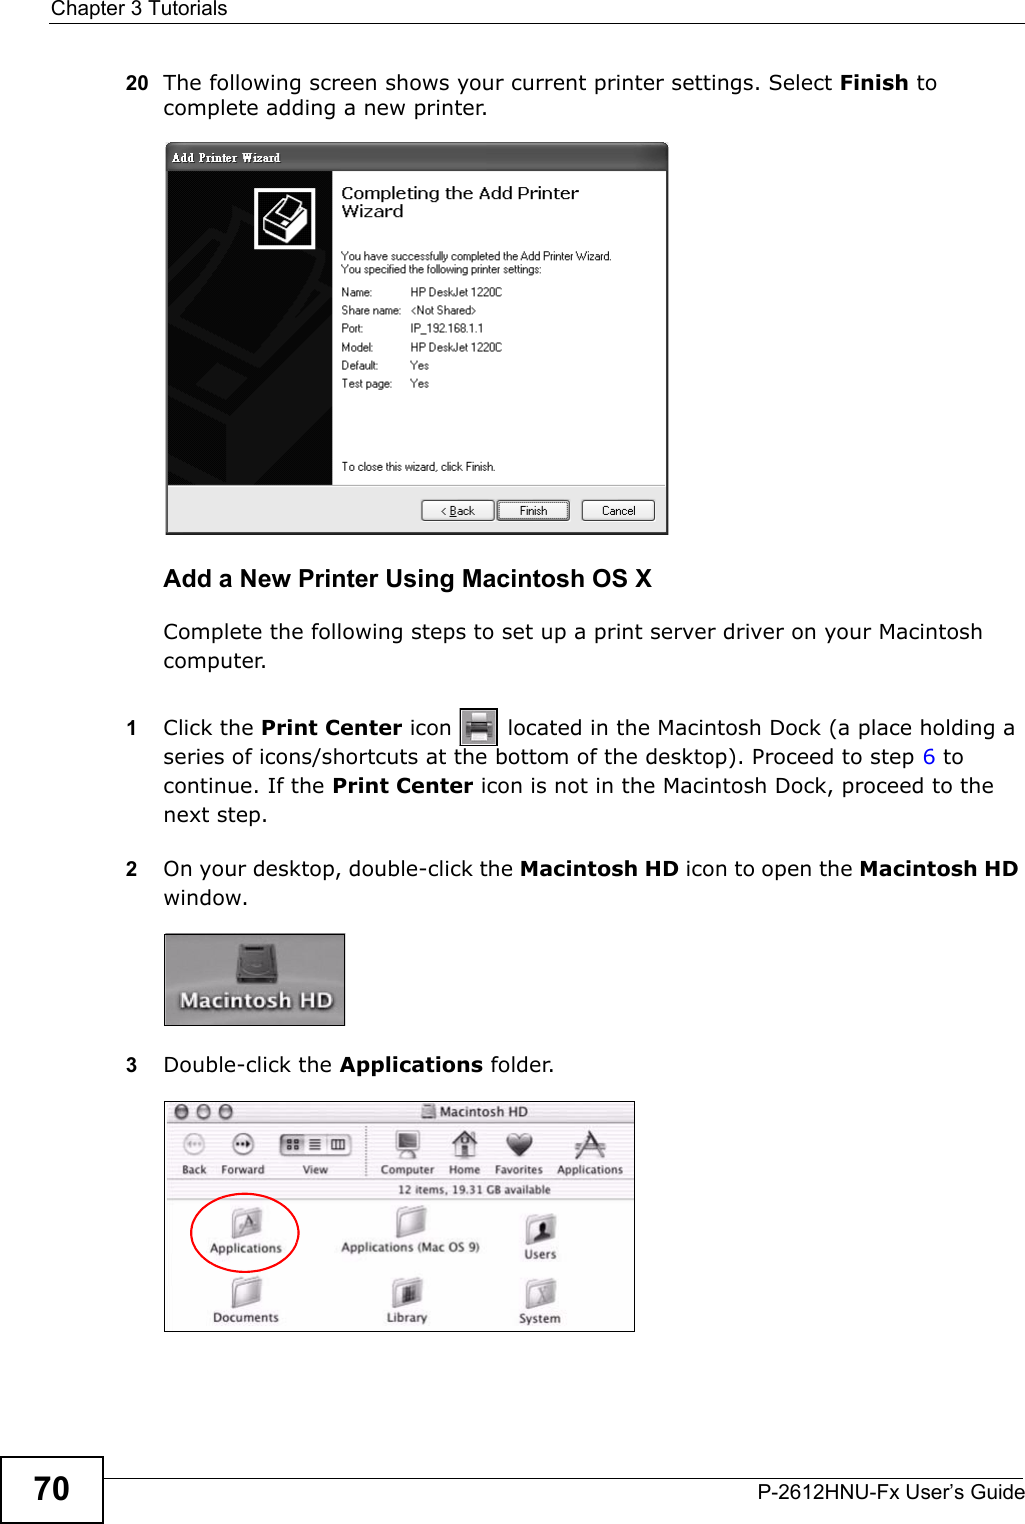 Chapter 3 TutorialsP-2612HNU-Fx User’s Guide7020 The following screen shows your current printer settings. Select Finish to complete adding a new printer.Tutorial: Add Printer Wizard CompleteAdd a New Printer Using Macintosh OS XComplete the following steps to set up a print server driver on your Macintosh computer.1Click the Print Center icon   located in the Macintosh Dock (a place holding a series of icons/shortcuts at the bottom of the desktop). Proceed to step 6 tocontinue. If the Print Center icon is not in the Macintosh Dock, proceed to the next step.2On your desktop, double-click the Macintosh HD icon to open the Macintosh HDwindow.Tutorial: Macintosh HD3Double-click the Applications folder.   Tutorial: Macintosh HD folder